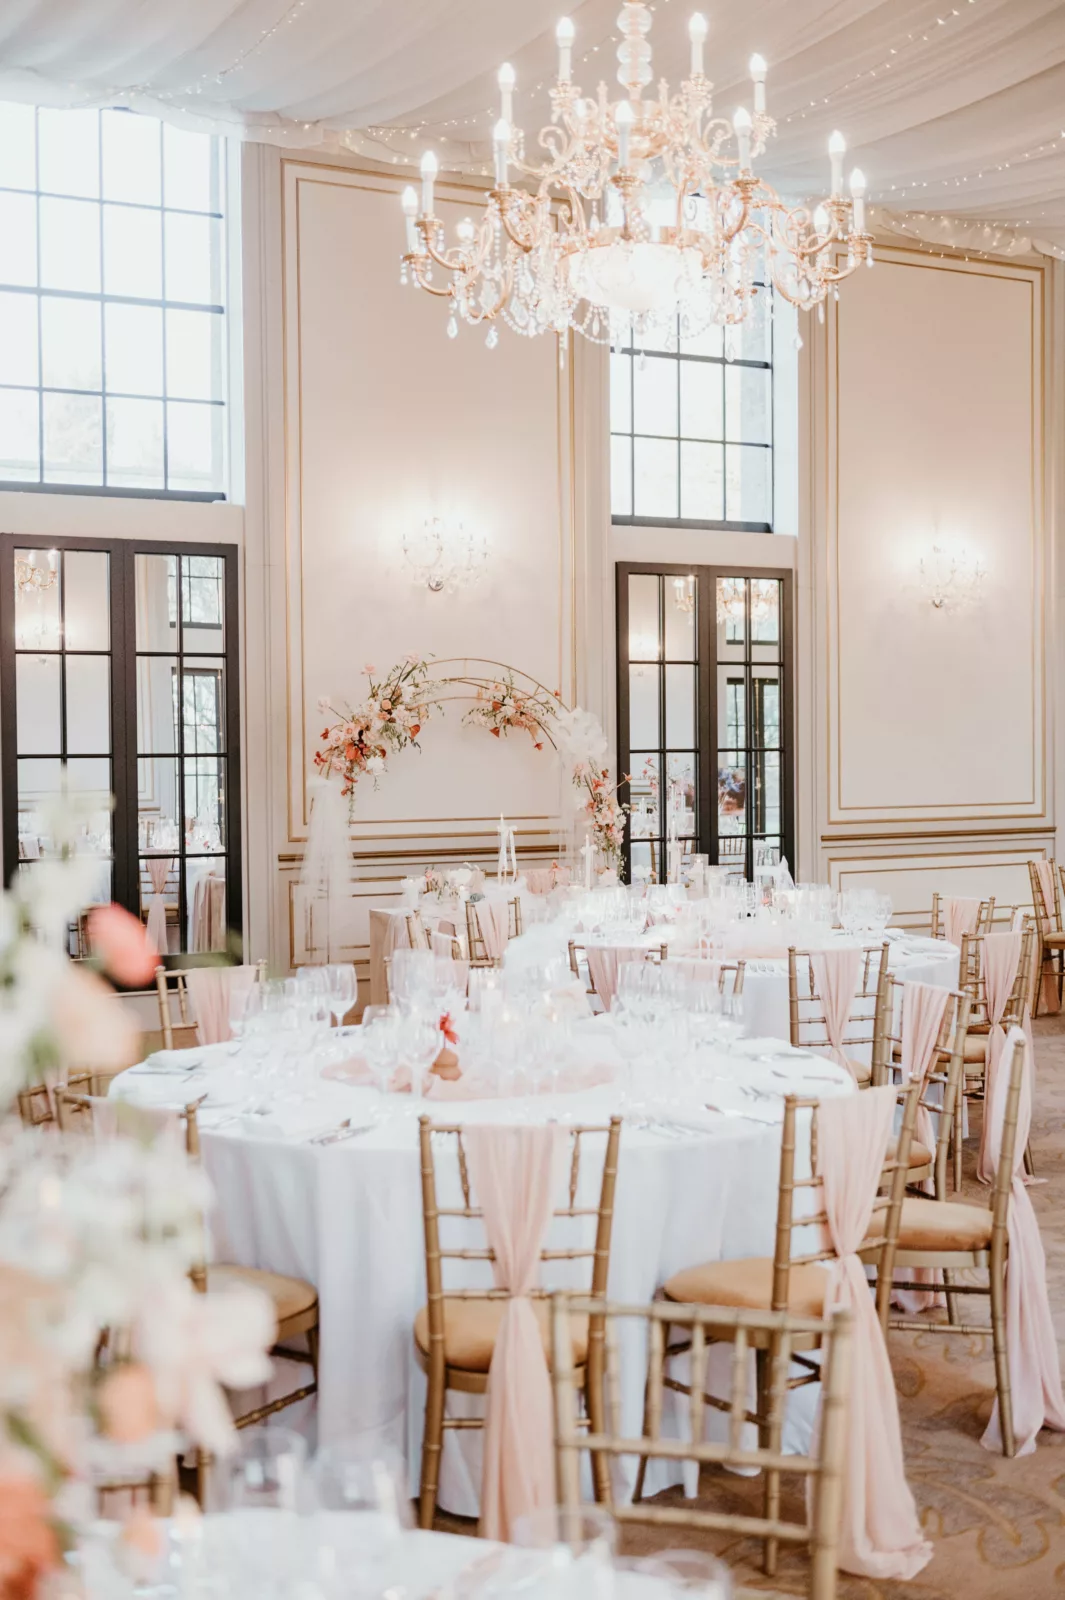 Dine Venues | Rise Hall | Winter wedding in Yorkshire | Stately home wedding venue | Peach wedding | Lucy Dennis Photography